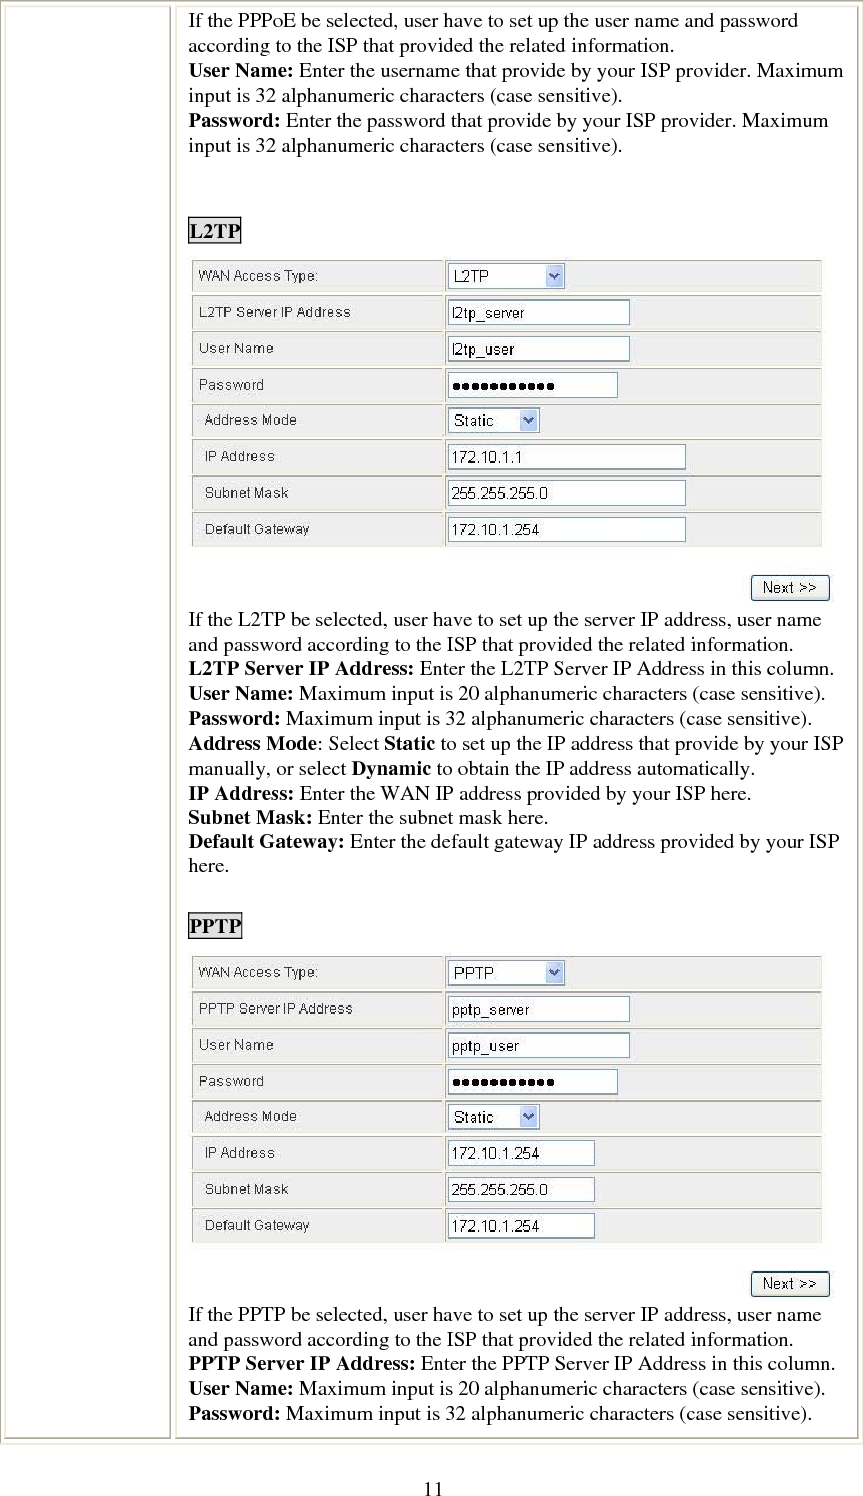   11If the PPPoE be selected, user have to set up the user name and password according to the ISP that provided the related information. User Name: Enter the username that provide by your ISP provider. Maximum input is 32 alphanumeric characters (case sensitive). Password: Enter the password that provide by your ISP provider. Maximum input is 32 alphanumeric characters (case sensitive).   L2TP  If the L2TP be selected, user have to set up the server IP address, user name and password according to the ISP that provided the related information. L2TP Server IP Address: Enter the L2TP Server IP Address in this column. User Name: Maximum input is 20 alphanumeric characters (case sensitive). Password: Maximum input is 32 alphanumeric characters (case sensitive). Address Mode: Select Static to set up the IP address that provide by your ISP manually, or select Dynamic to obtain the IP address automatically. IP Address: Enter the WAN IP address provided by your ISP here. Subnet Mask: Enter the subnet mask here. Default Gateway: Enter the default gateway IP address provided by your ISP here.  PPTP  If the PPTP be selected, user have to set up the server IP address, user name and password according to the ISP that provided the related information. PPTP Server IP Address: Enter the PPTP Server IP Address in this column. User Name: Maximum input is 20 alphanumeric characters (case sensitive). Password: Maximum input is 32 alphanumeric characters (case sensitive). 